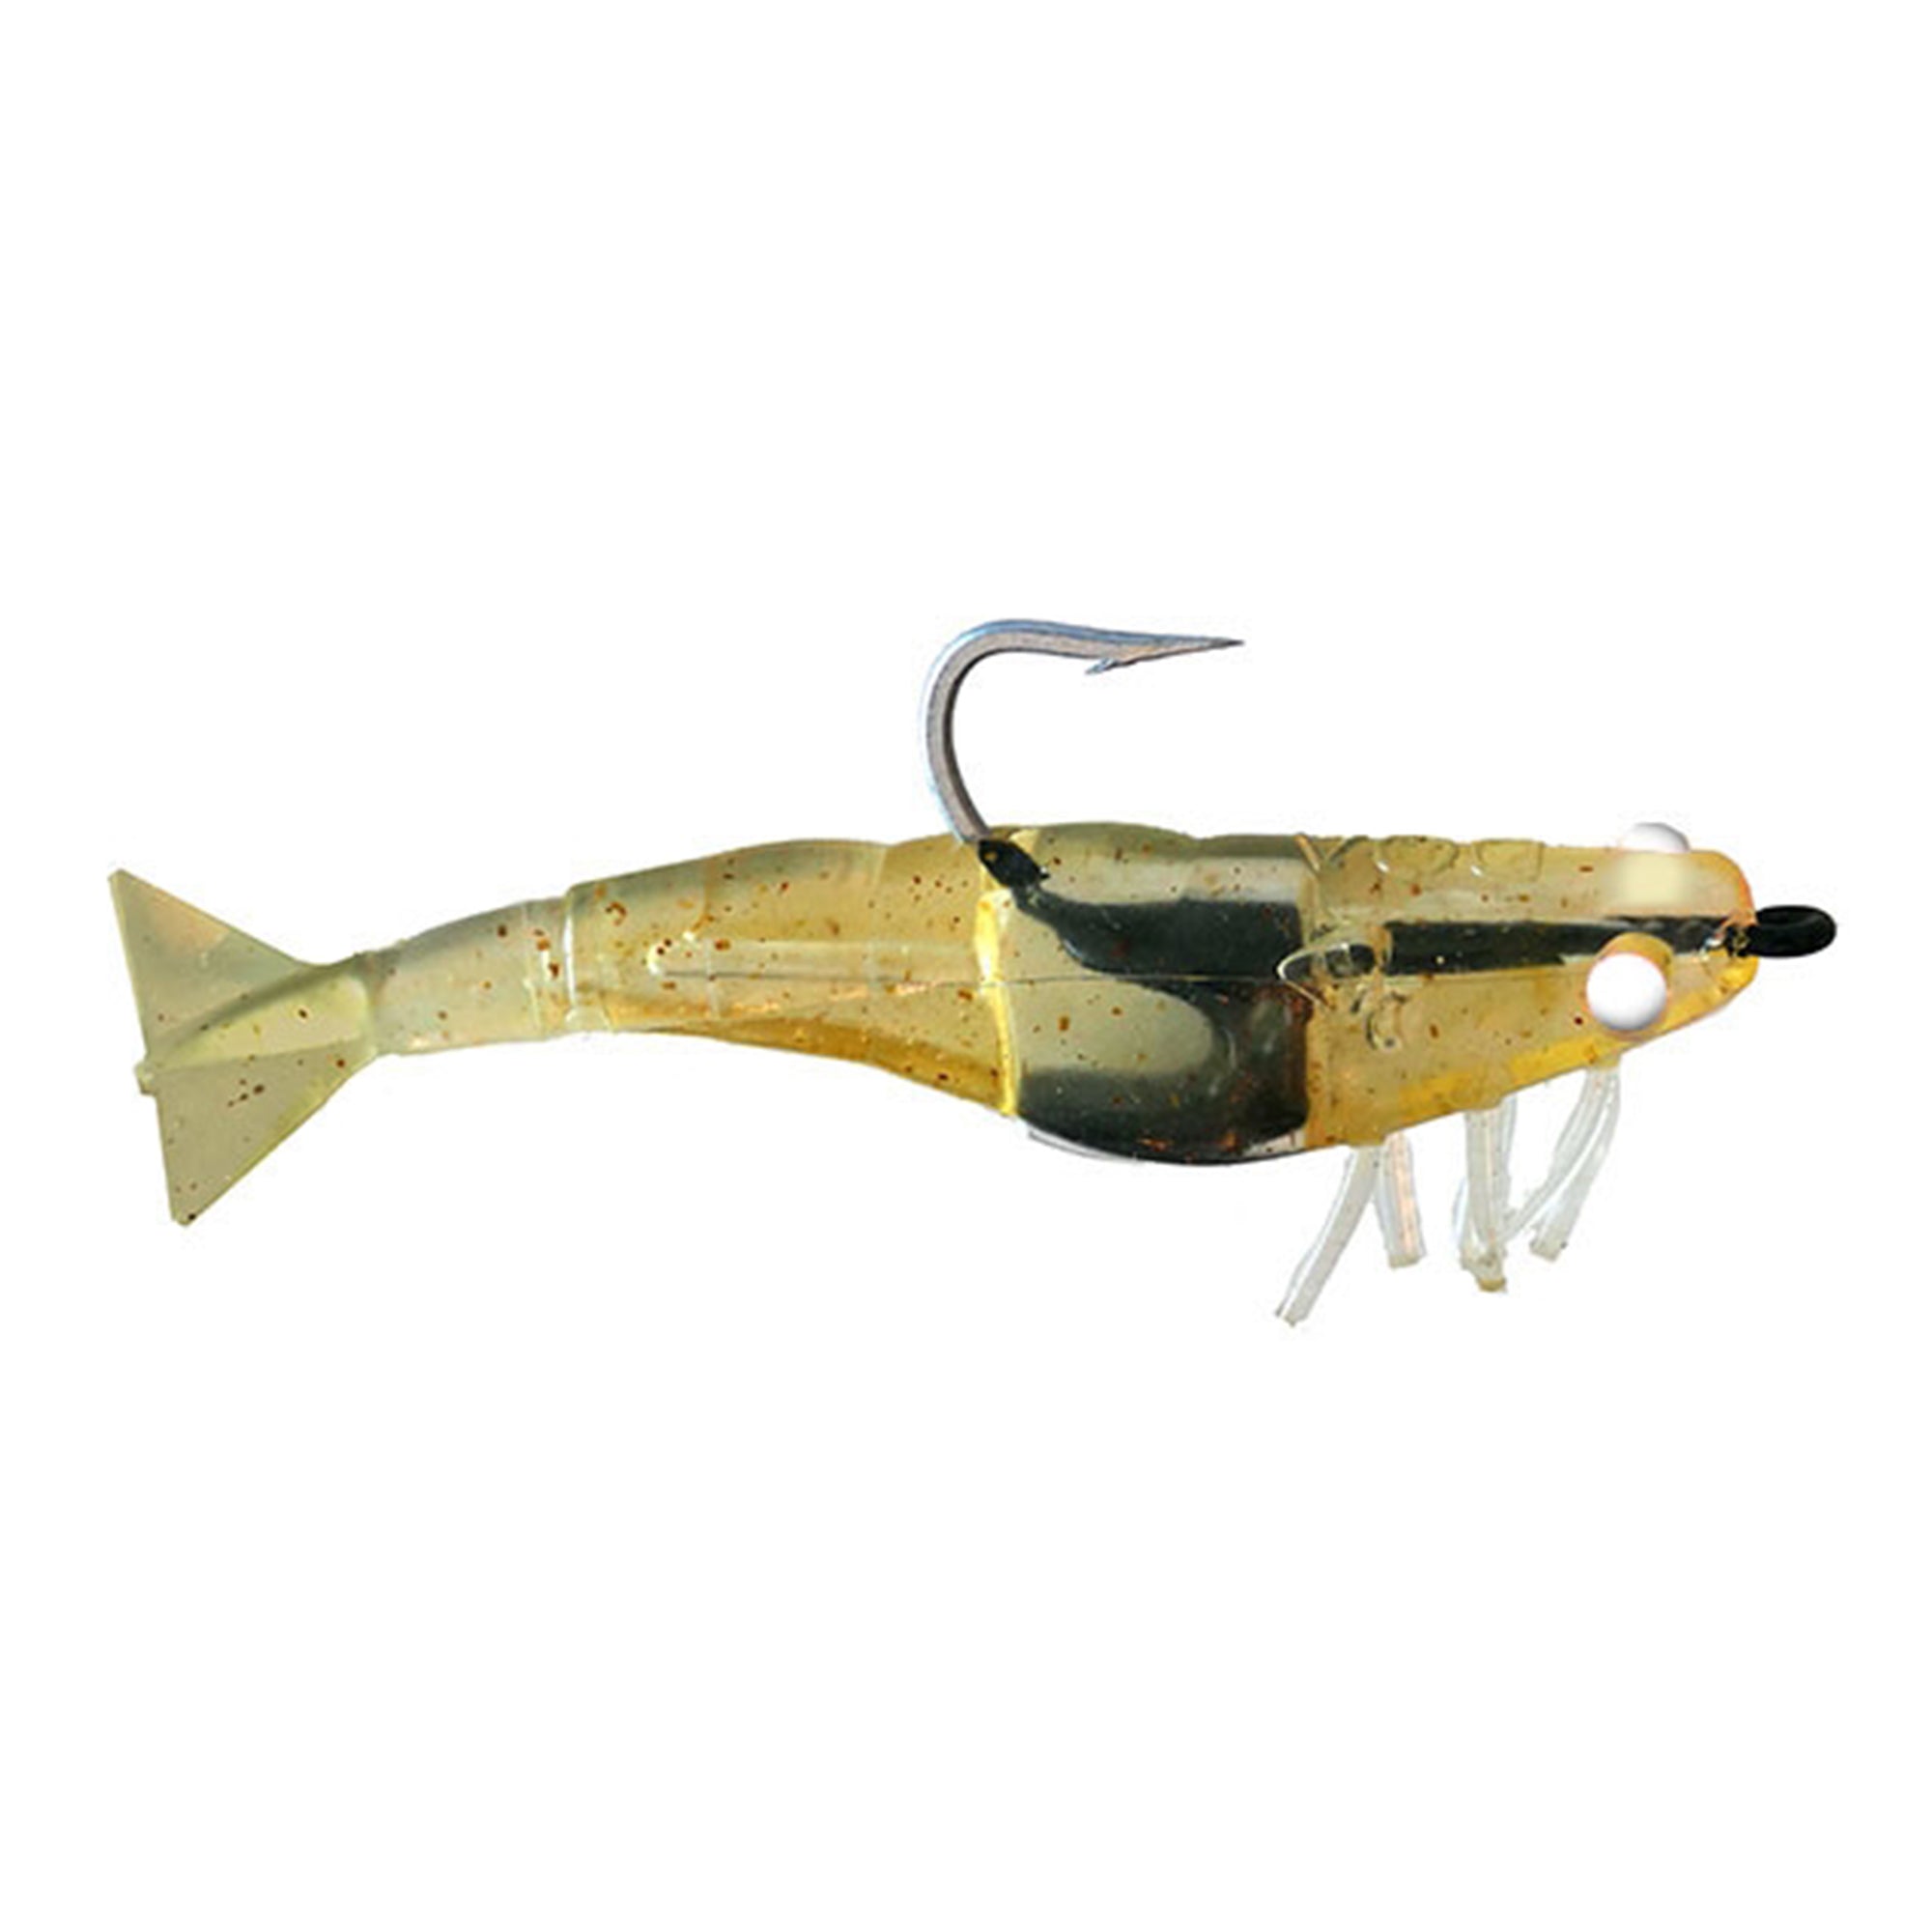 DOA Fishing Lure 66002 C.A.L. Pinch Weight 1/4 oz Natural 7 Per Pack 